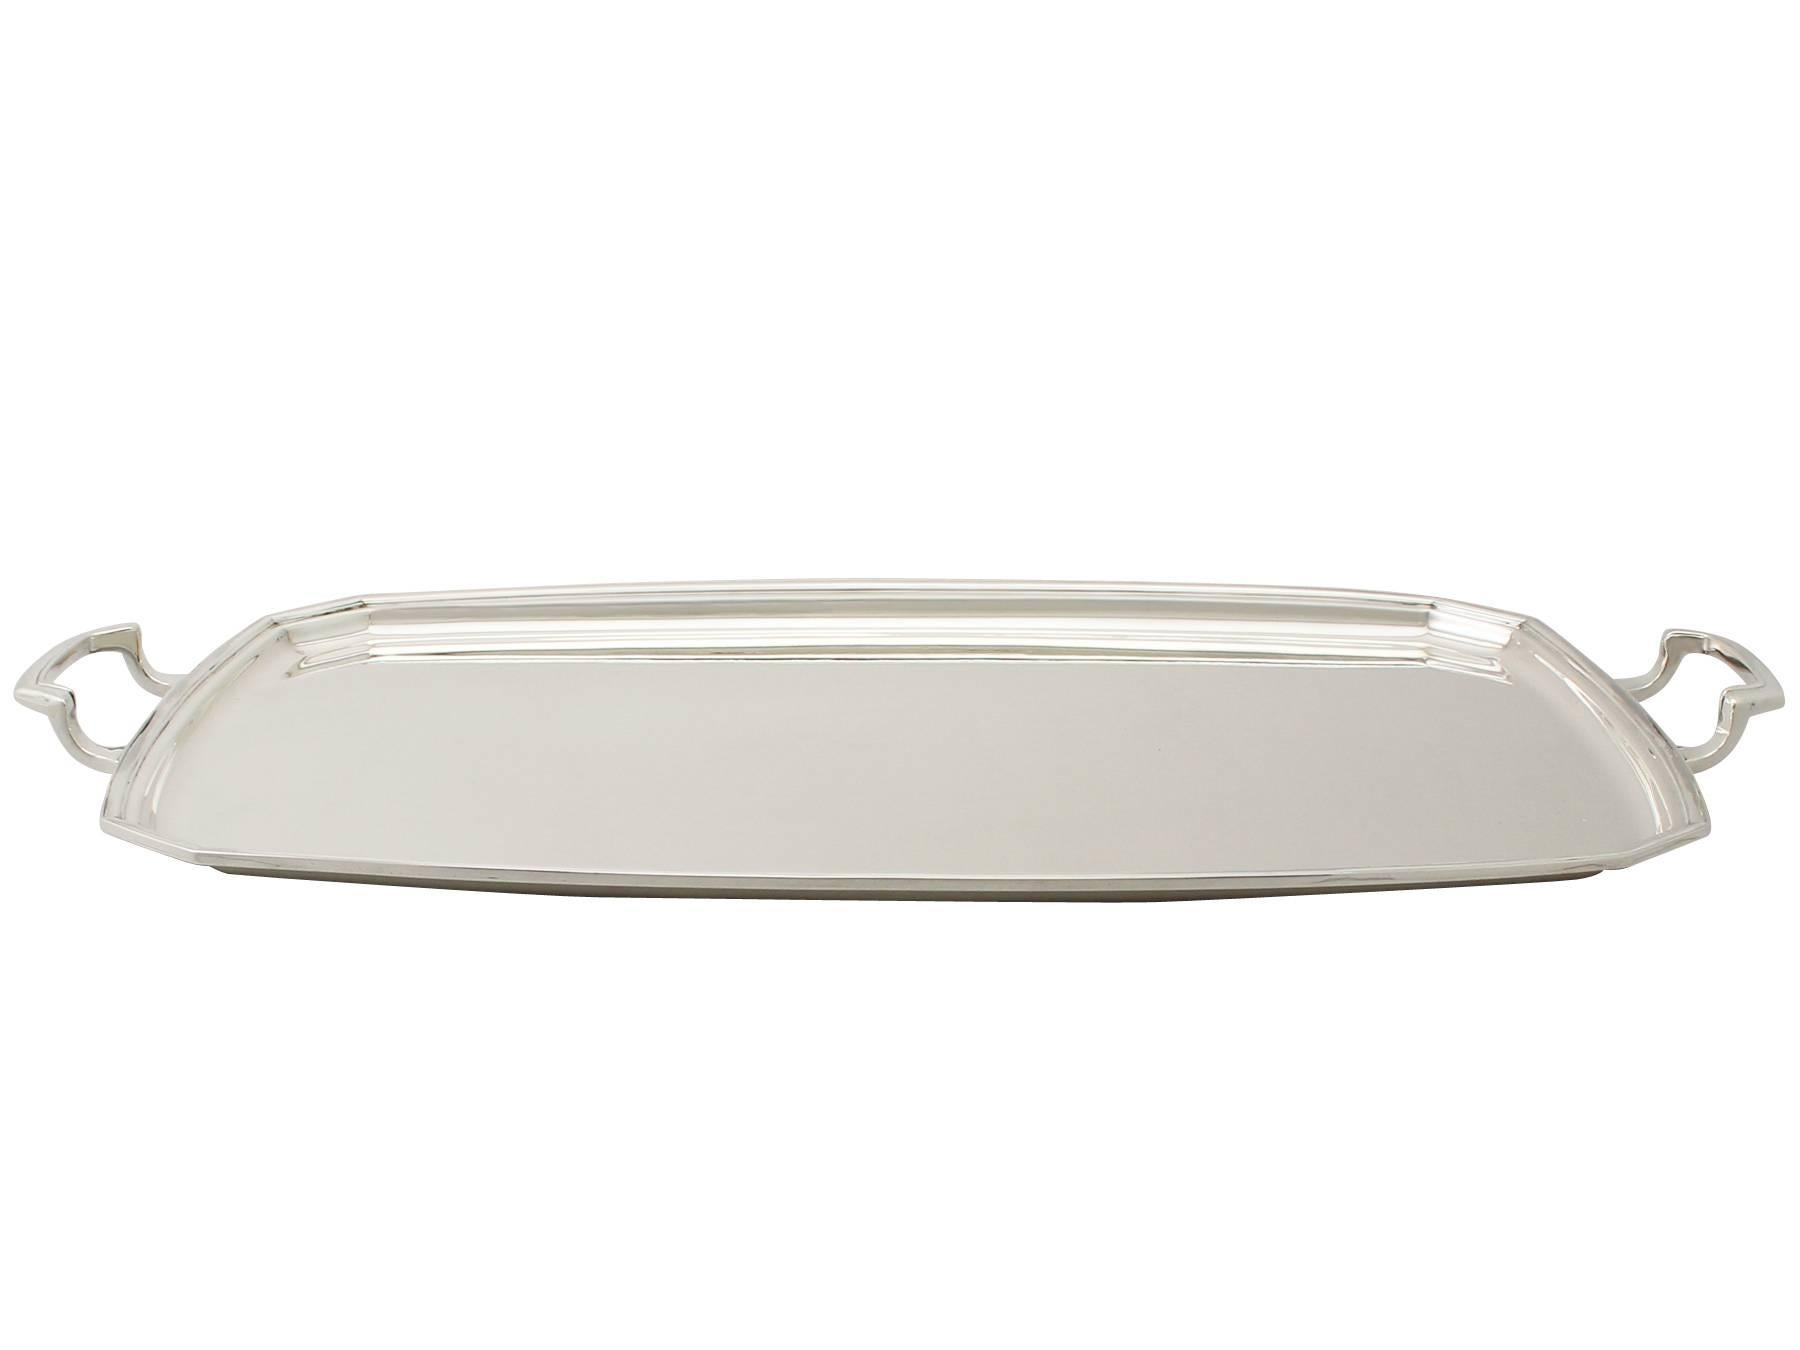 An exceptional, fine and impressive vintage George VI English sterling silver tray in the Art Deco style; an addition to our range of silver trays, salvers and plates.

This exceptional vintage George VI sterling silver tray has a plain